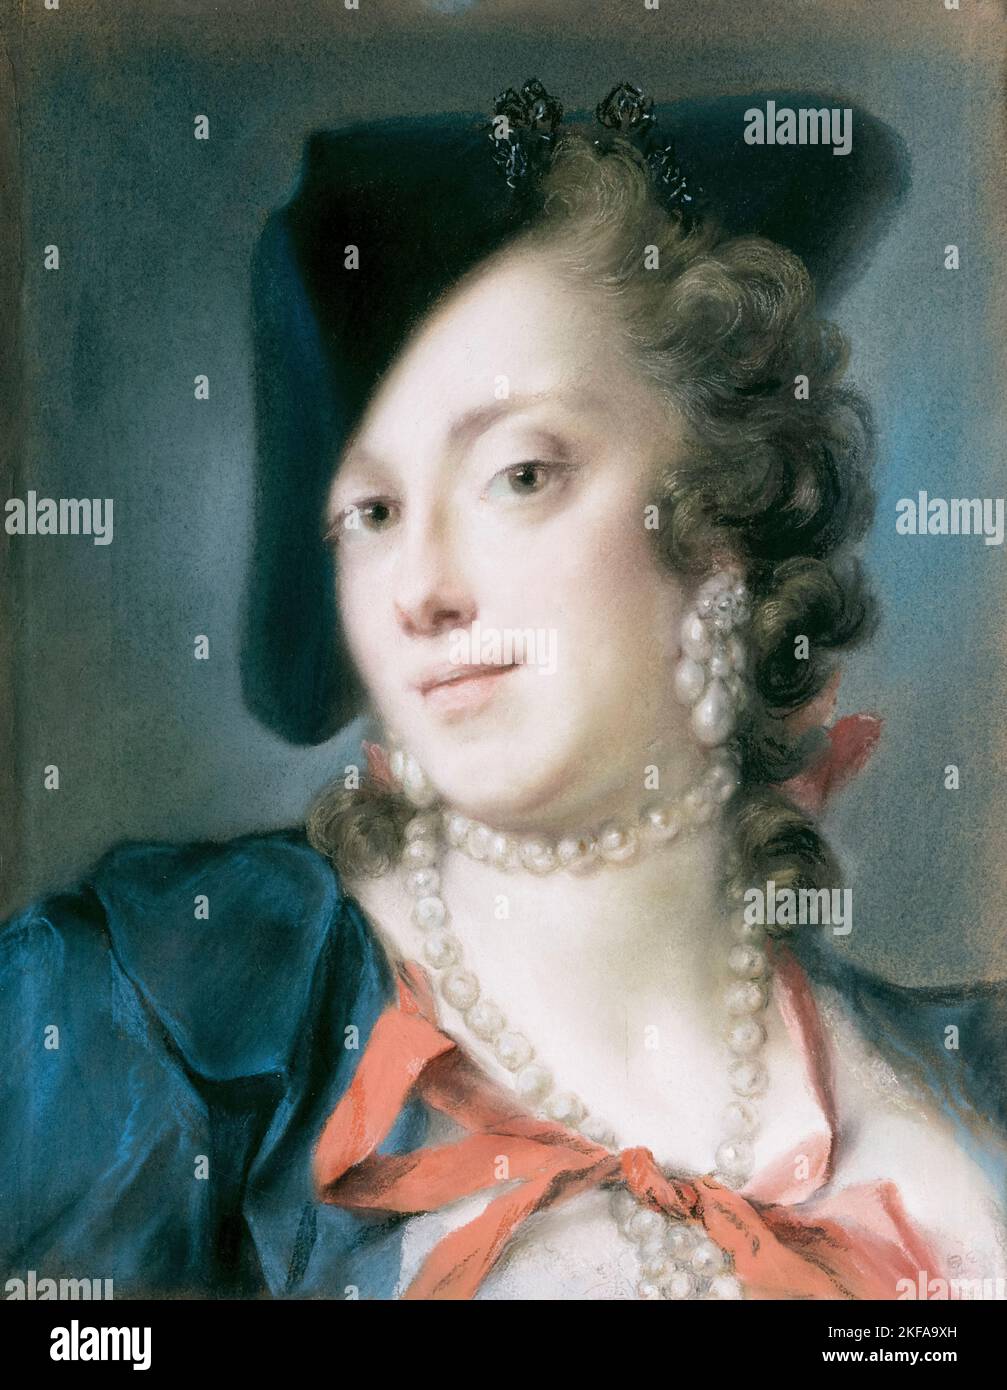 Caterina Sagredo Barbarigo (1715-1772), was a Venetian aristocrat, casino holder, and notorious salonniére, portrait painting in pastel by Rosalba Carriera, 1735-1740 Stock Photo